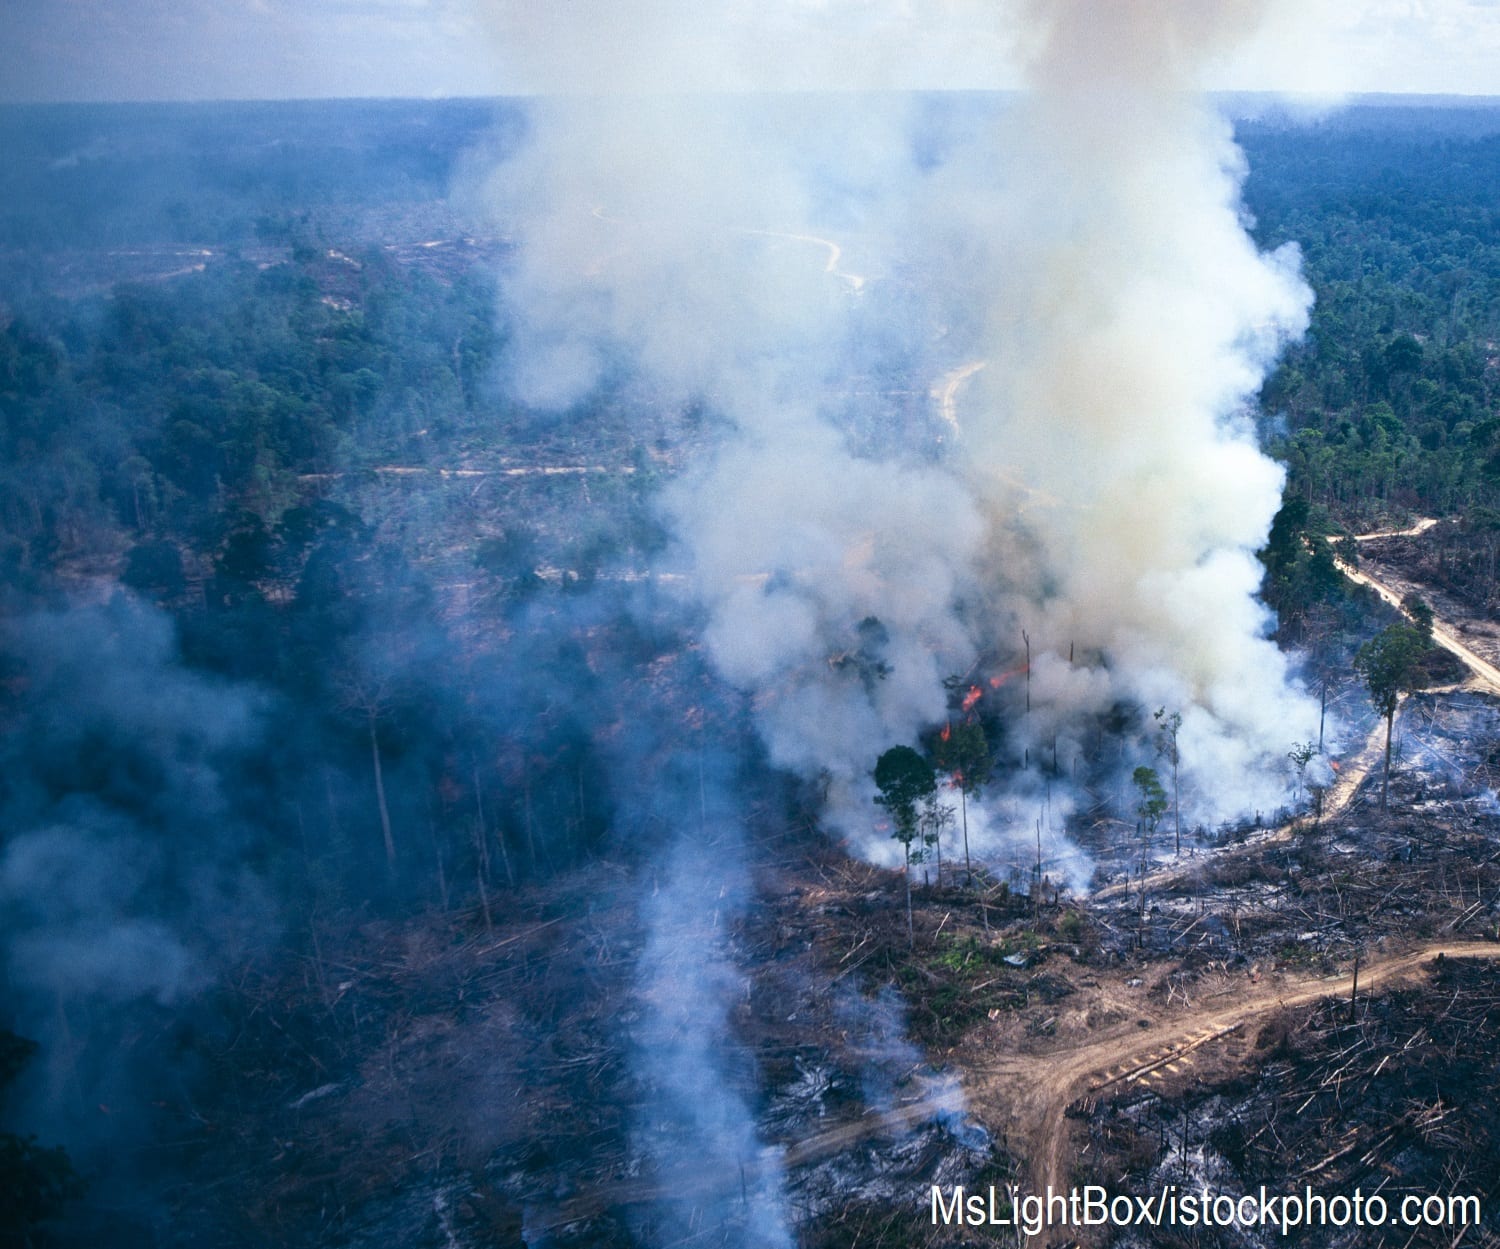 Forest in Sumatra being removed by slash and burn to make way for palm oil plantations.